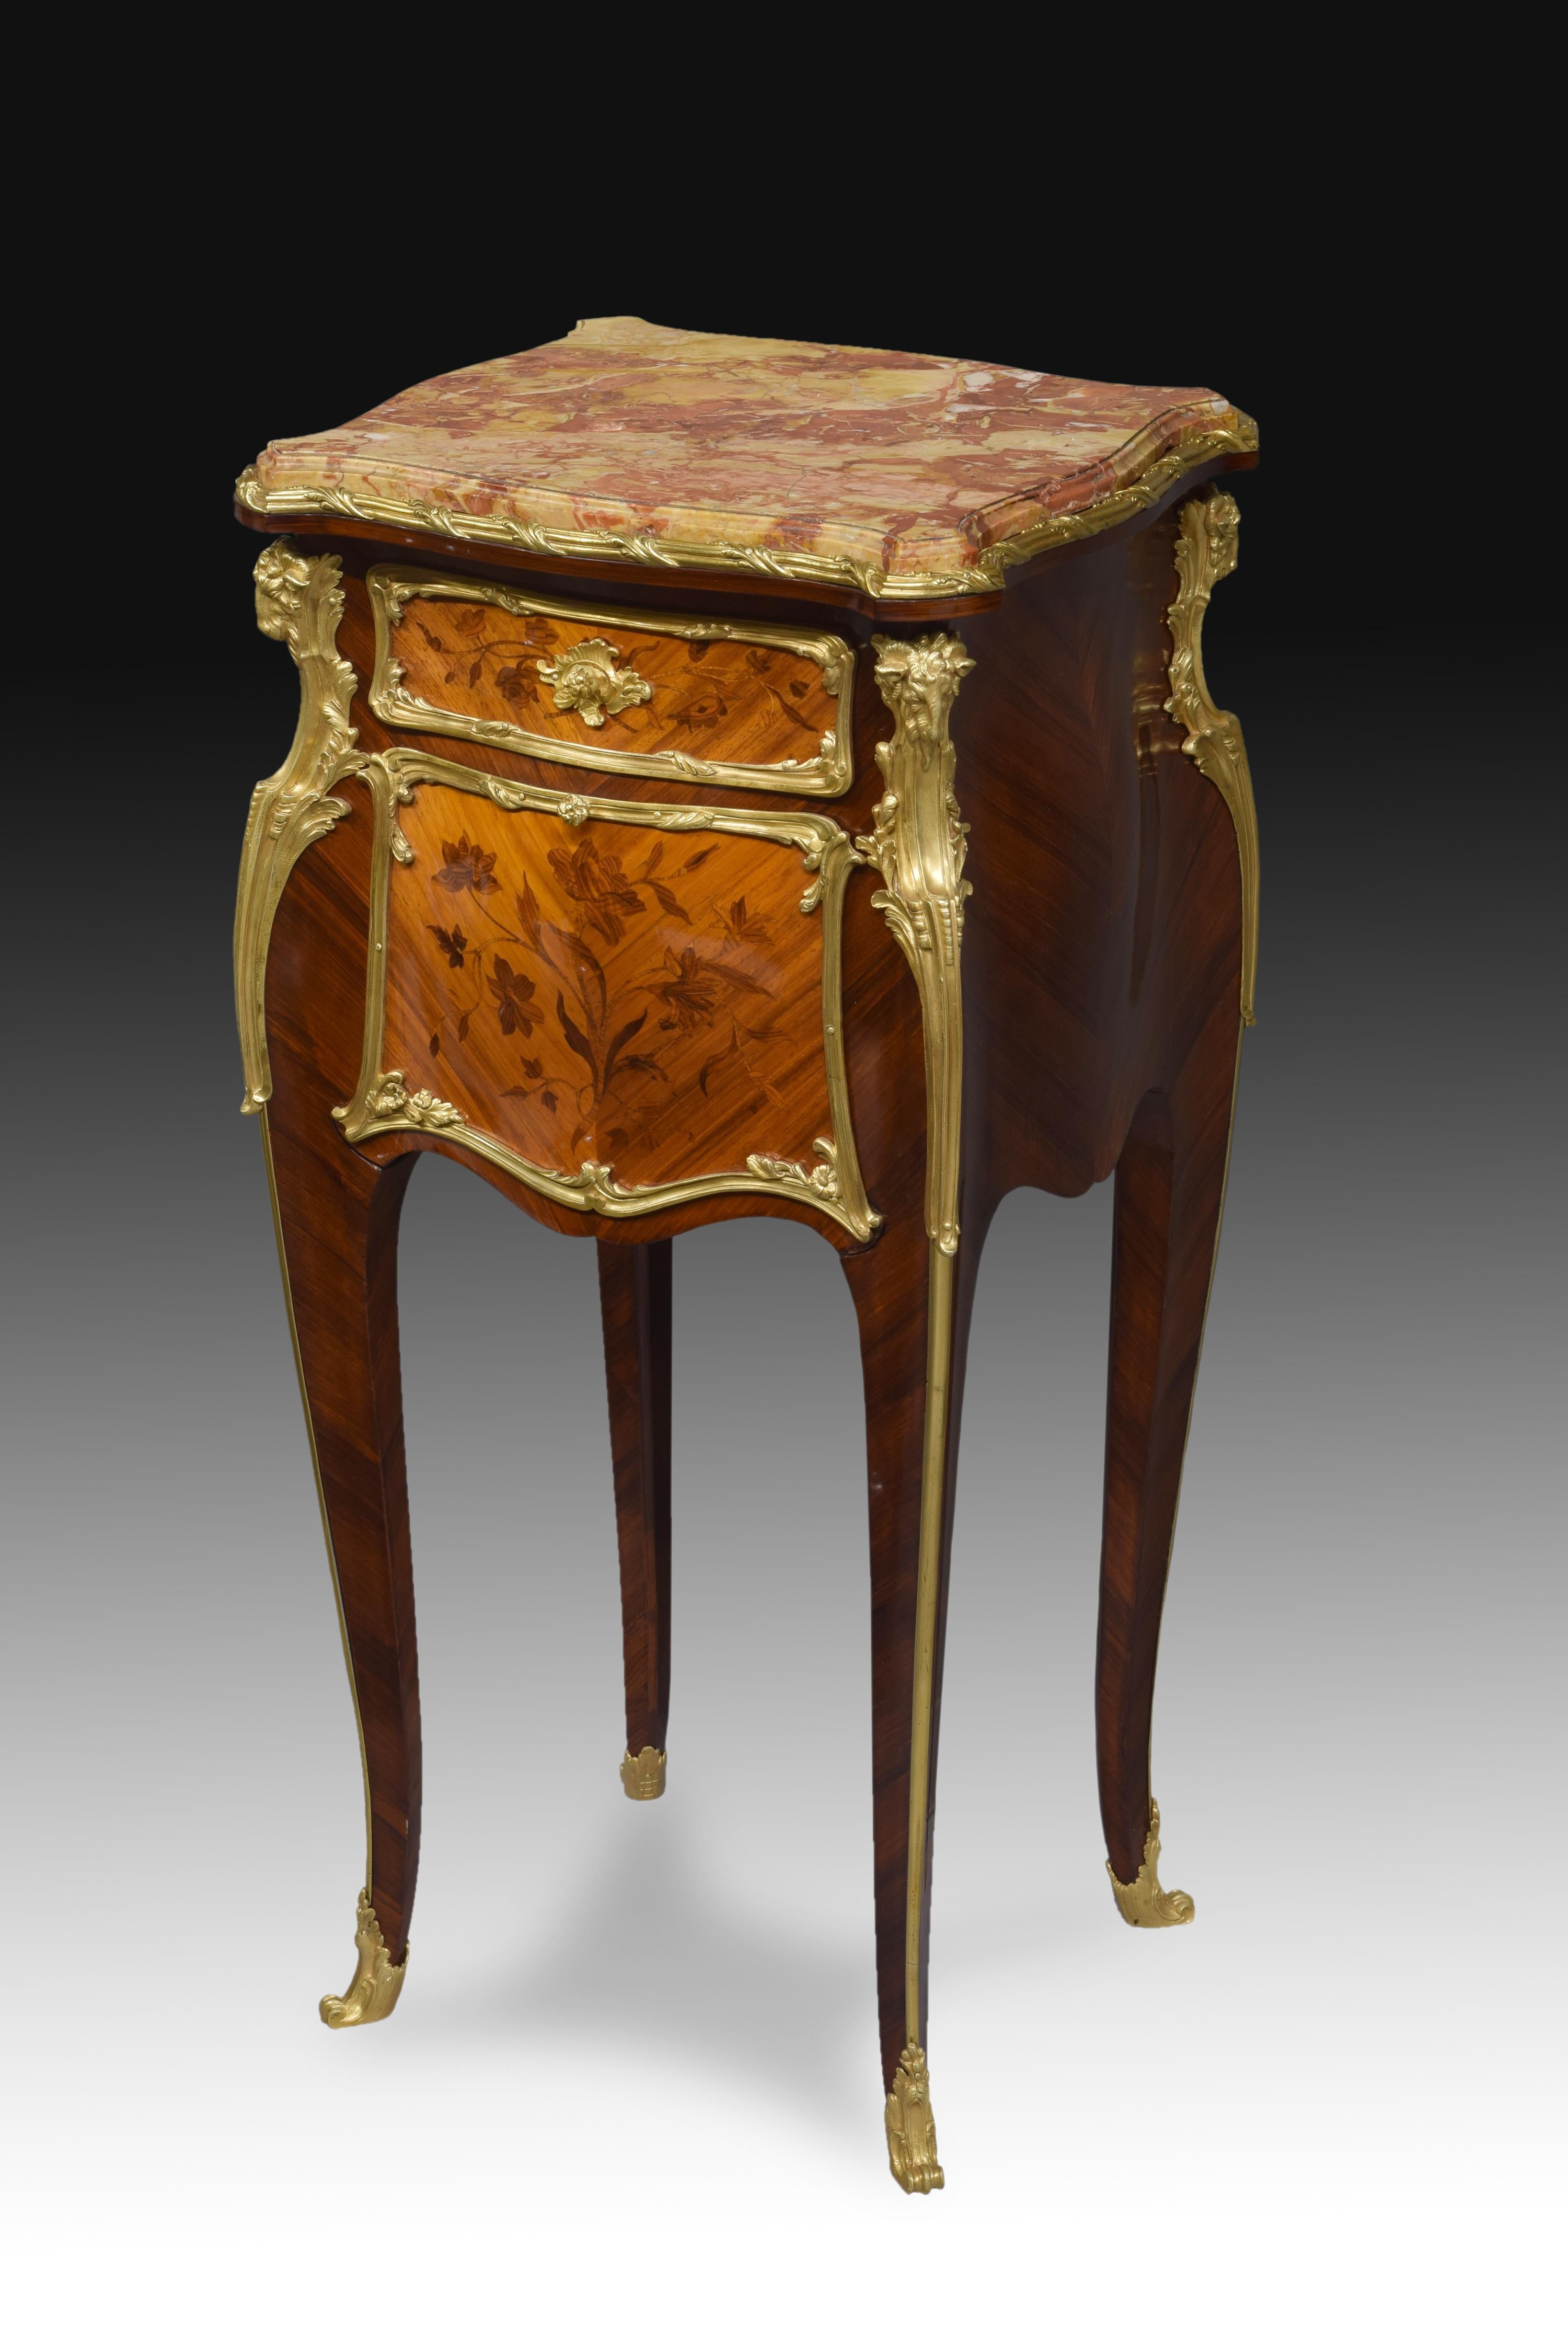 Side table, Louis XV style. Marble, wood, marquetry, bronze. Attributed to Joseph-Emmanuel Zwiener (active circa 1875-1900). France, towards the end of the 19th century. 
Auxiliary furniture with four legs with a light cabriolet shape, marble top